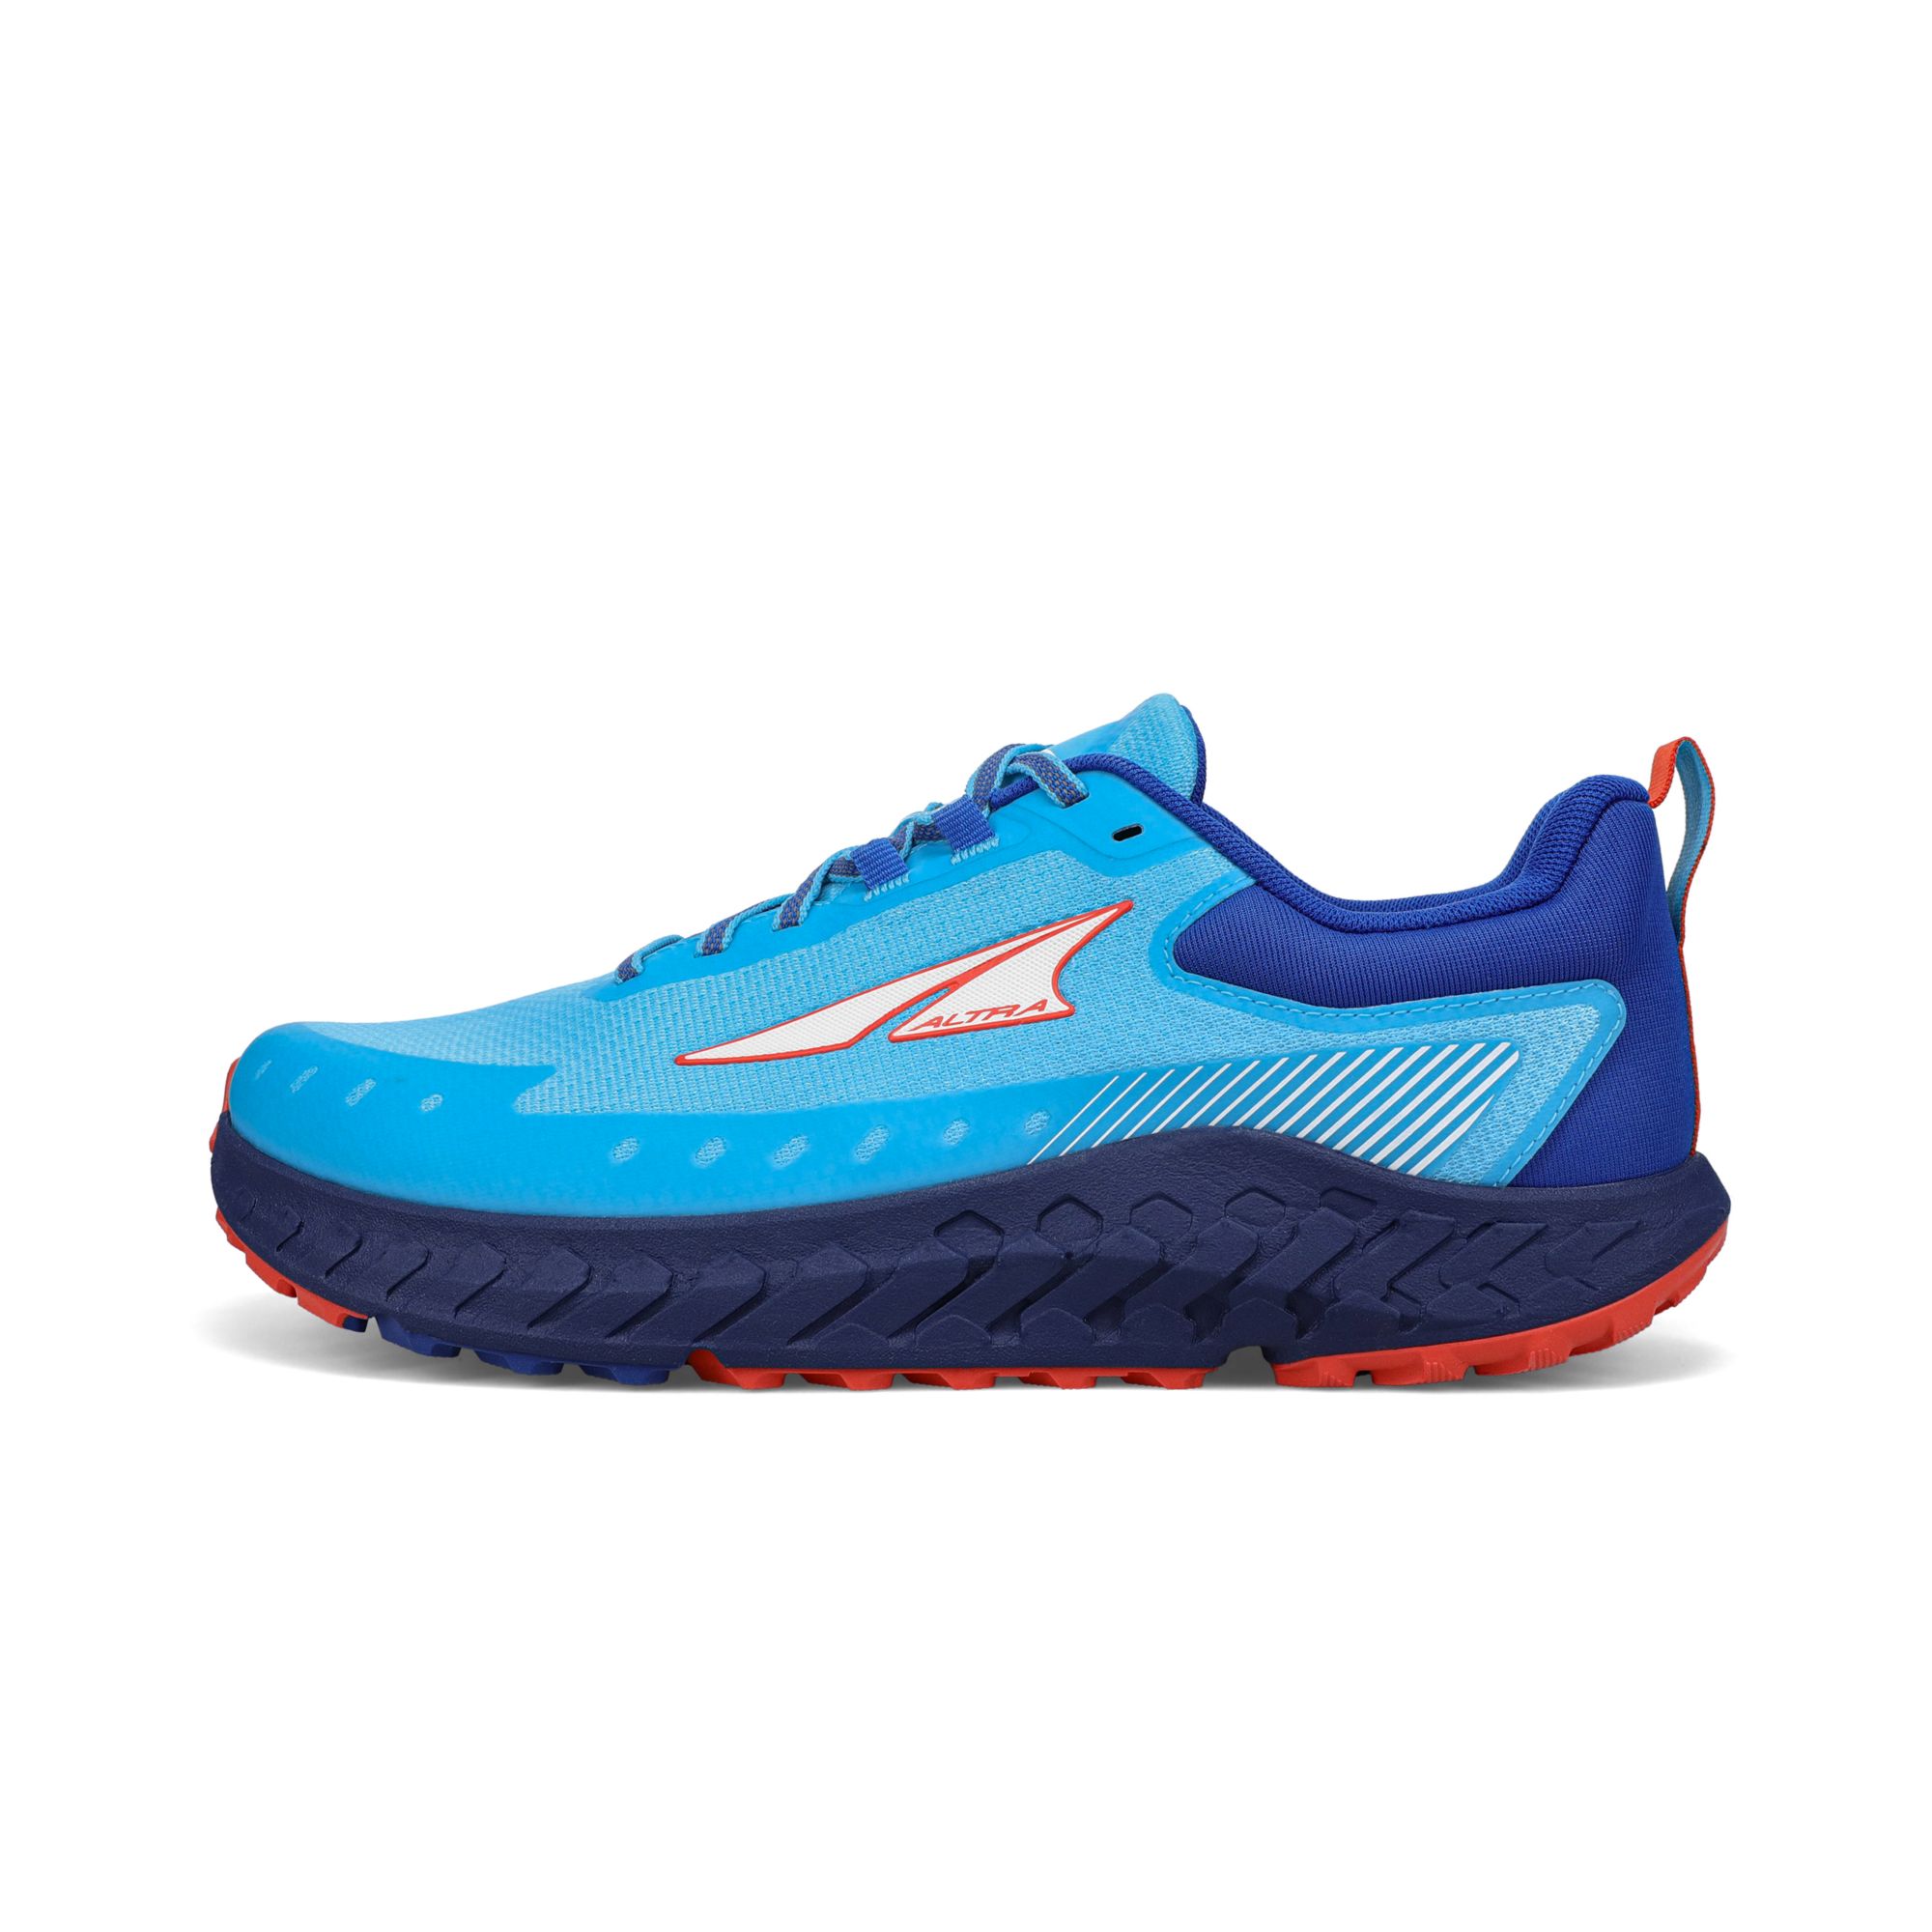 Men's Running Shoes & Athletic Sneakers | Altra® Running